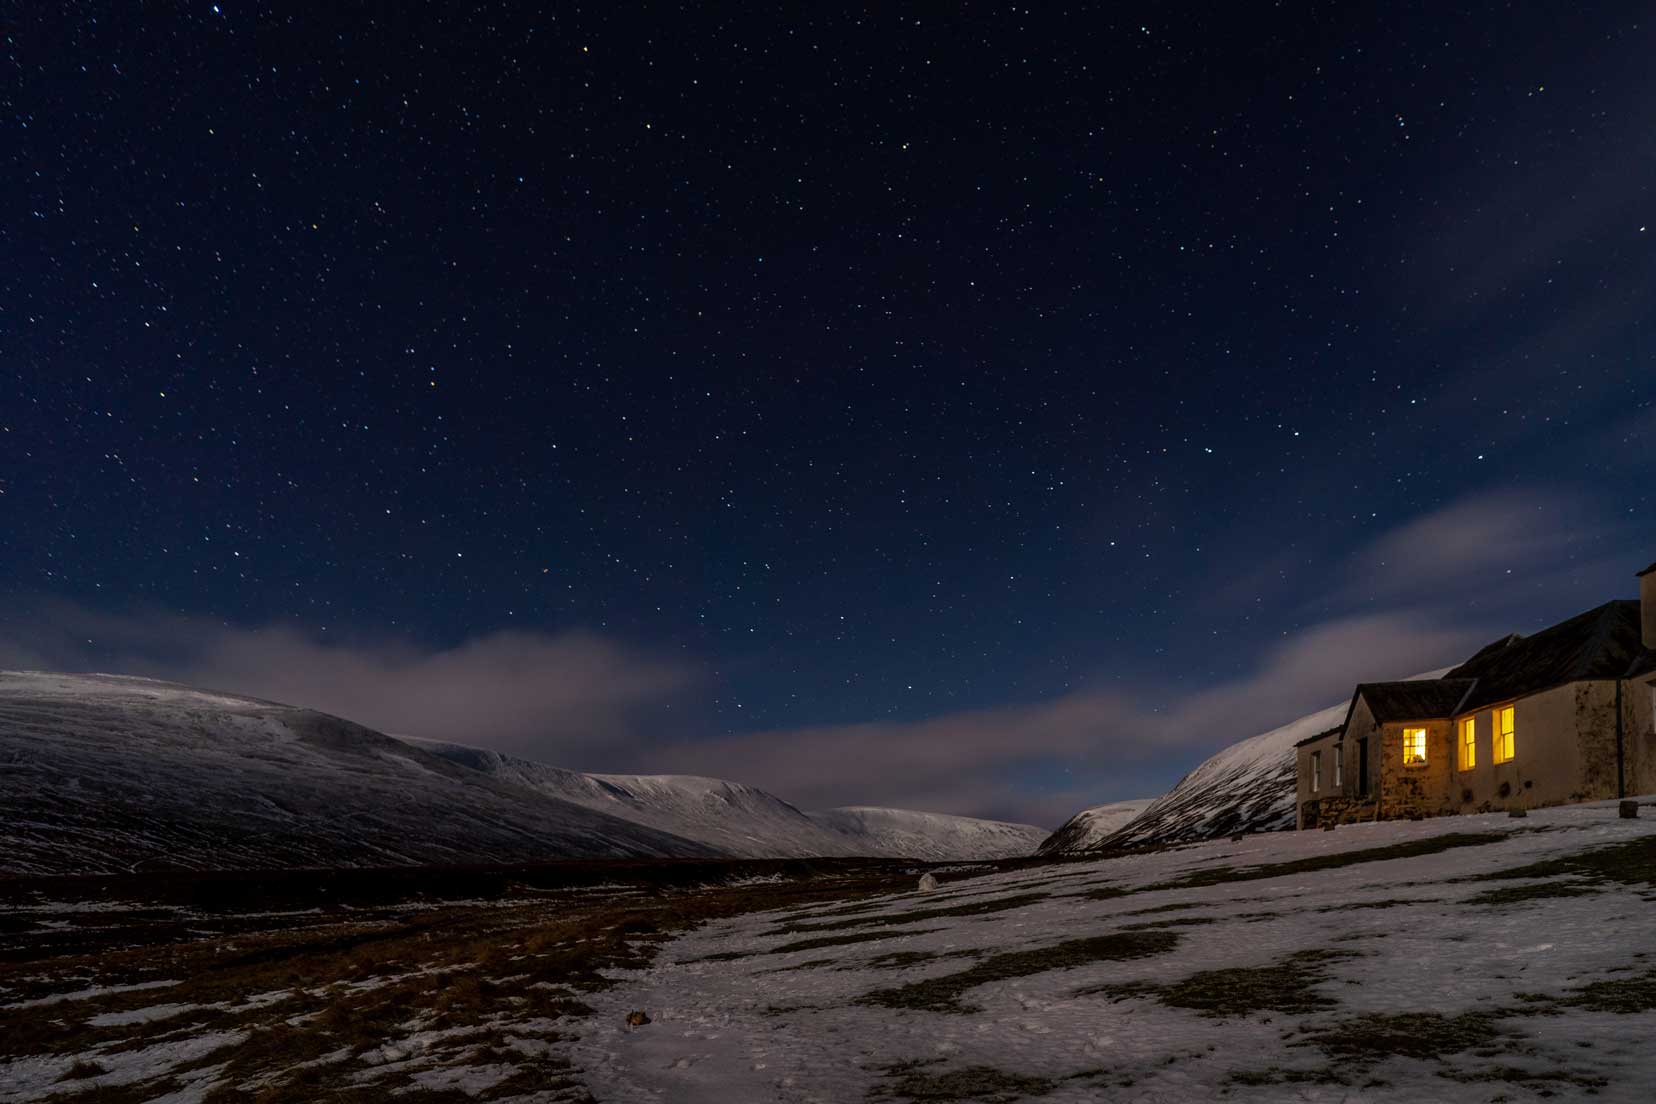 Bruar-Lodge,Cairngorms night shot with snowy mountain backdrop